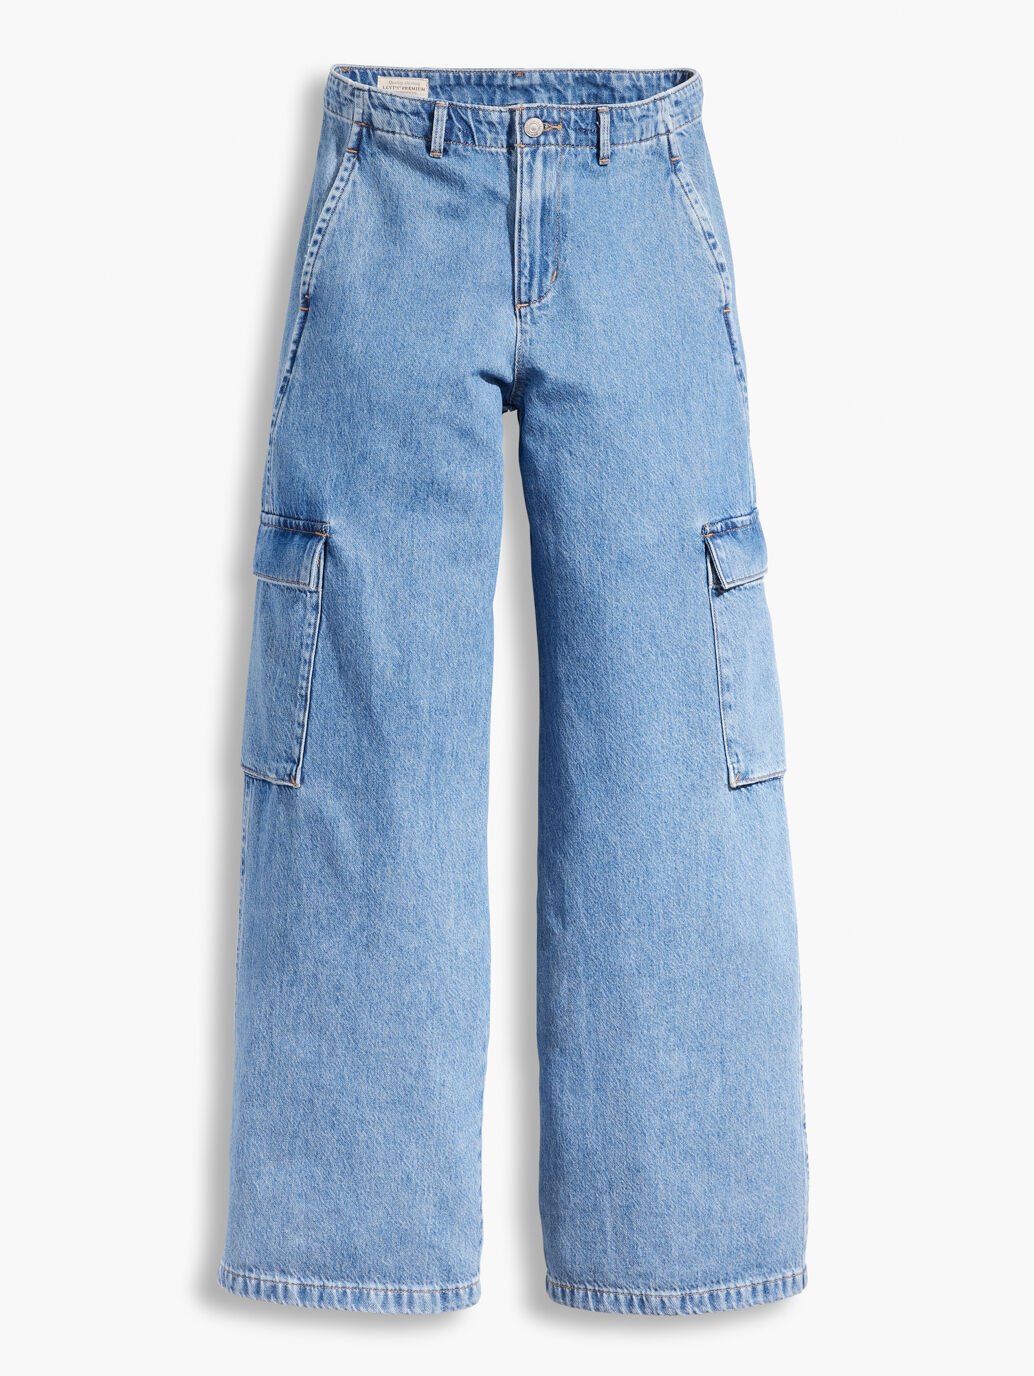 Levi's Womens Baggy Cargo Jeans